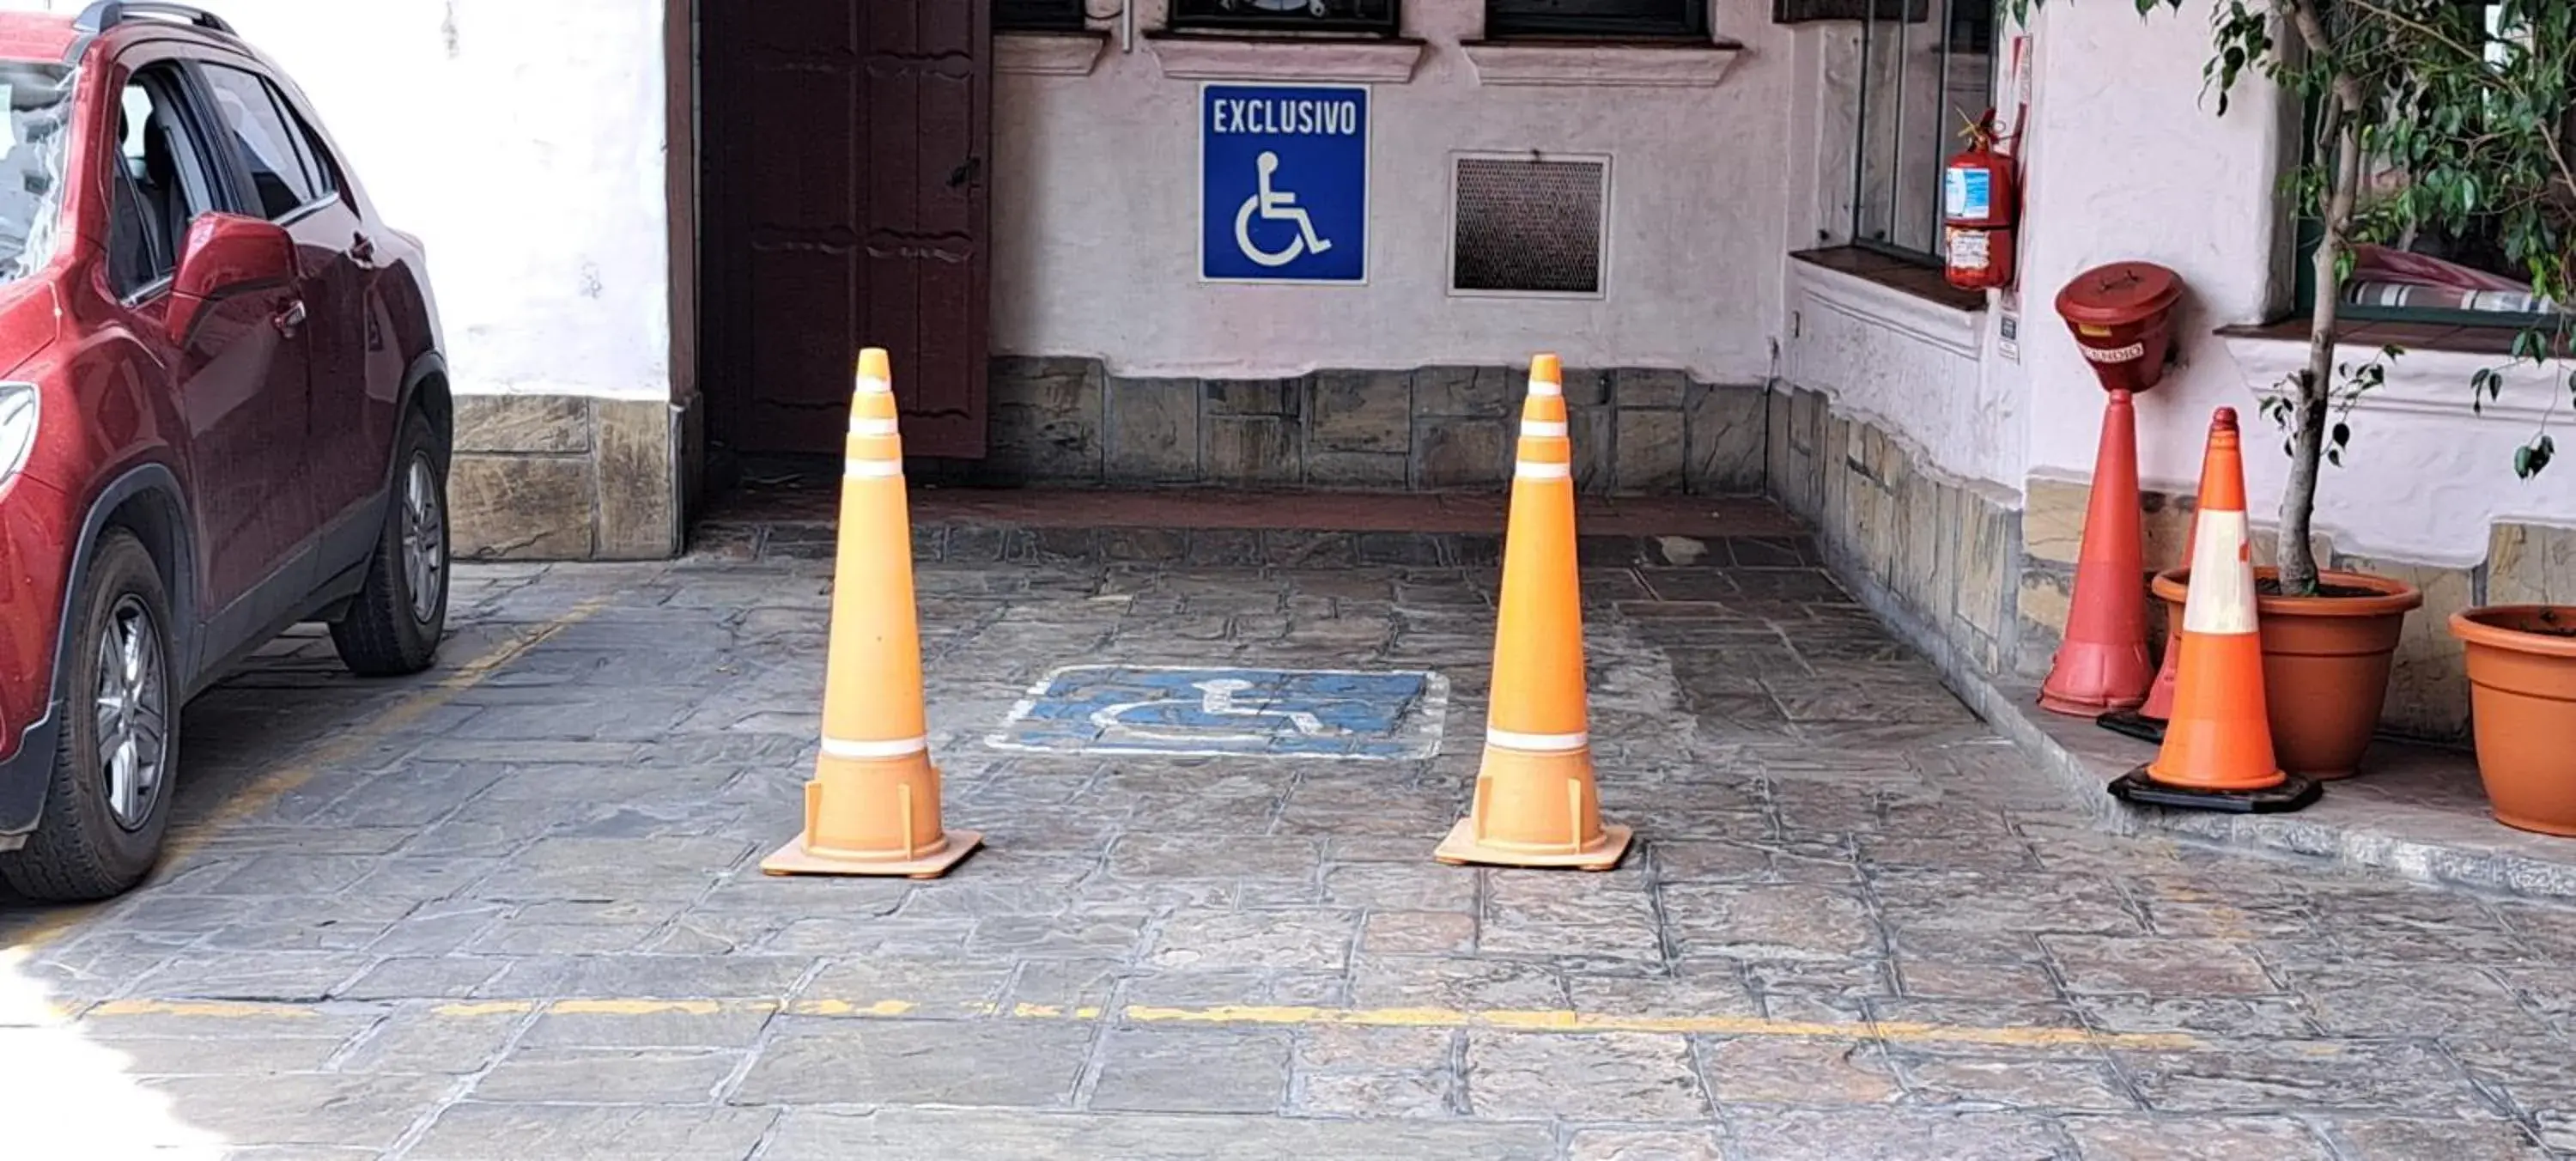 Facility for disabled guests in Hotel Salta